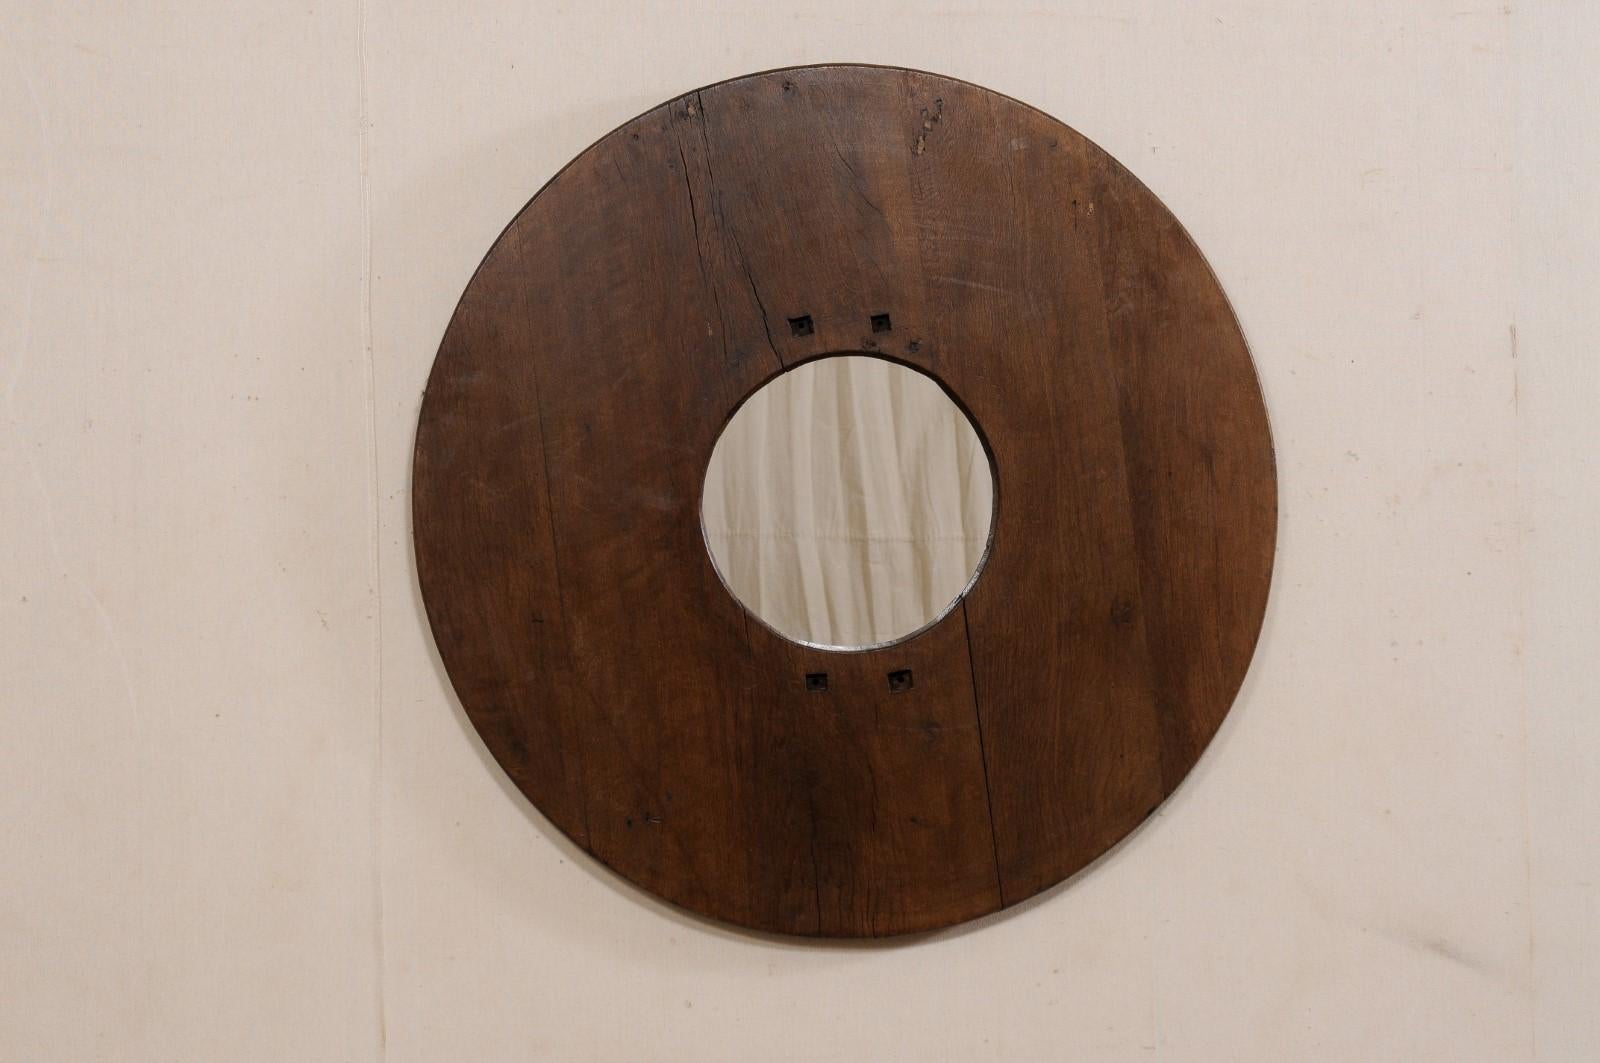 A unique circular mirror which has been custom fashioned with an antique Spanish wooden brazier as the surround, with new mirrored glass in it's center. This wall decoration features a new, circular-shaped mirror at center, within a beautiful wooden